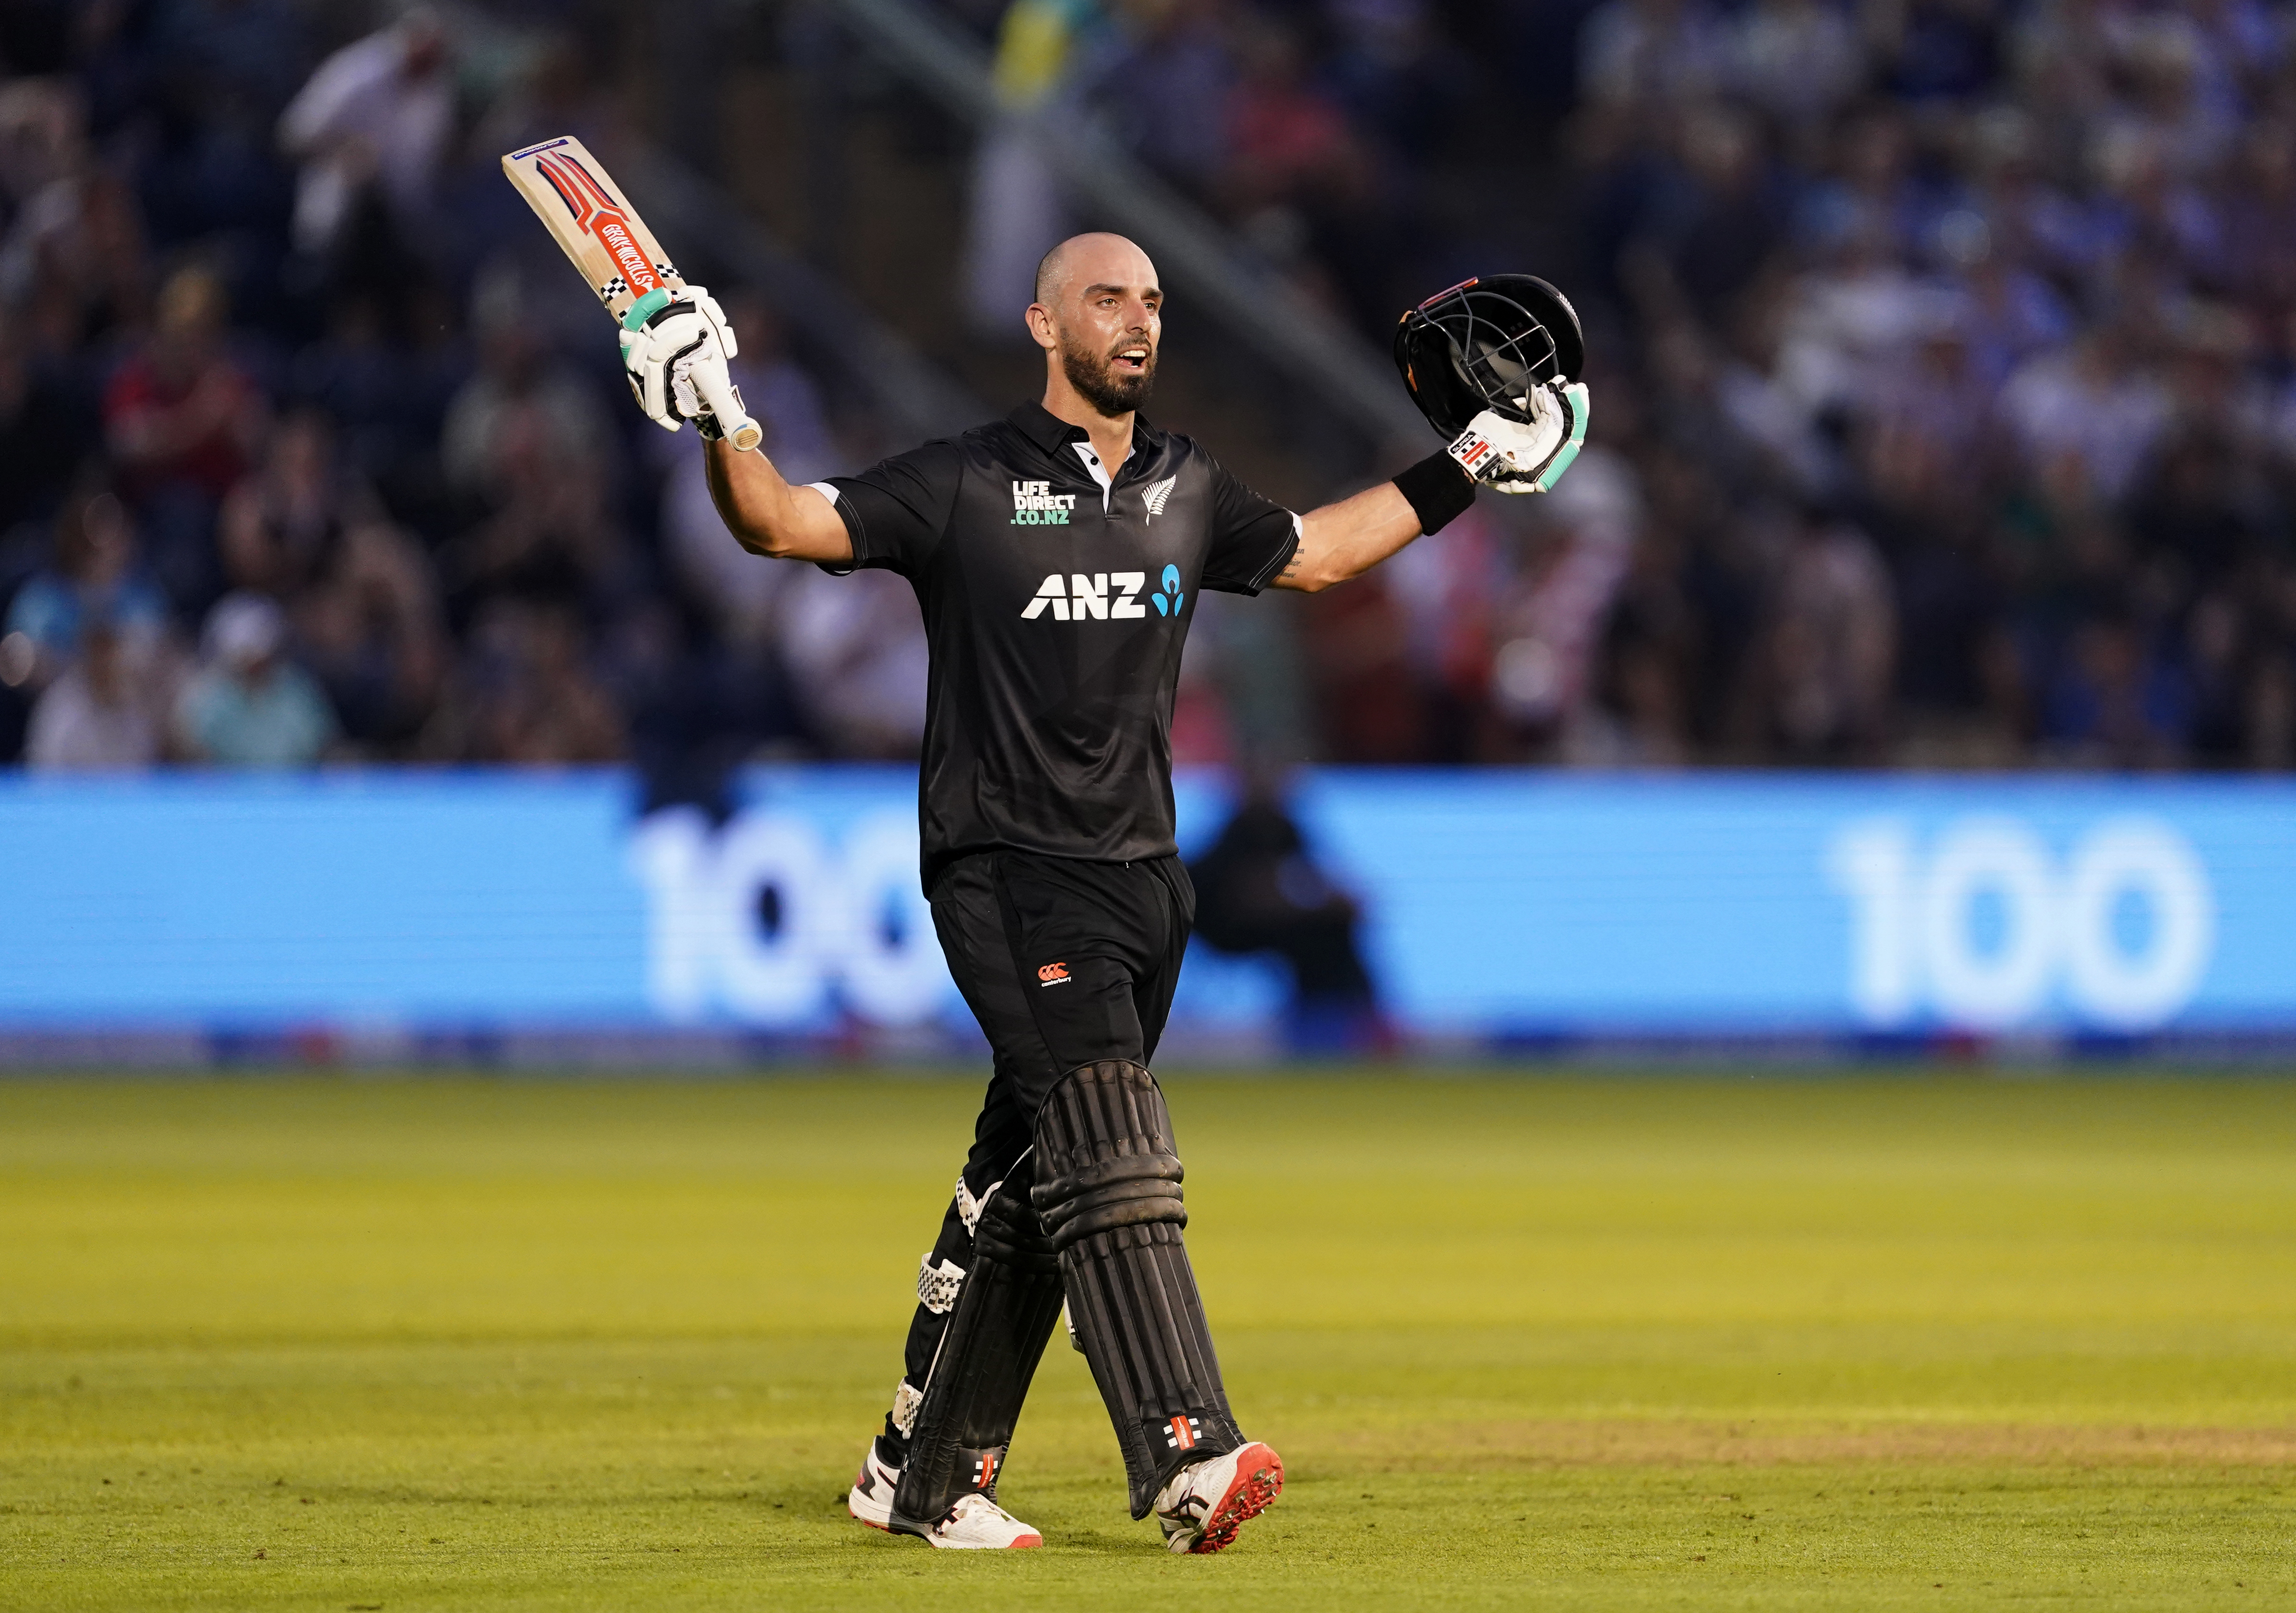 Daryl Mitchell hastened New Zealand's victory push with seven sixes in his unbeaten hundred (Joe Giddens/PA)